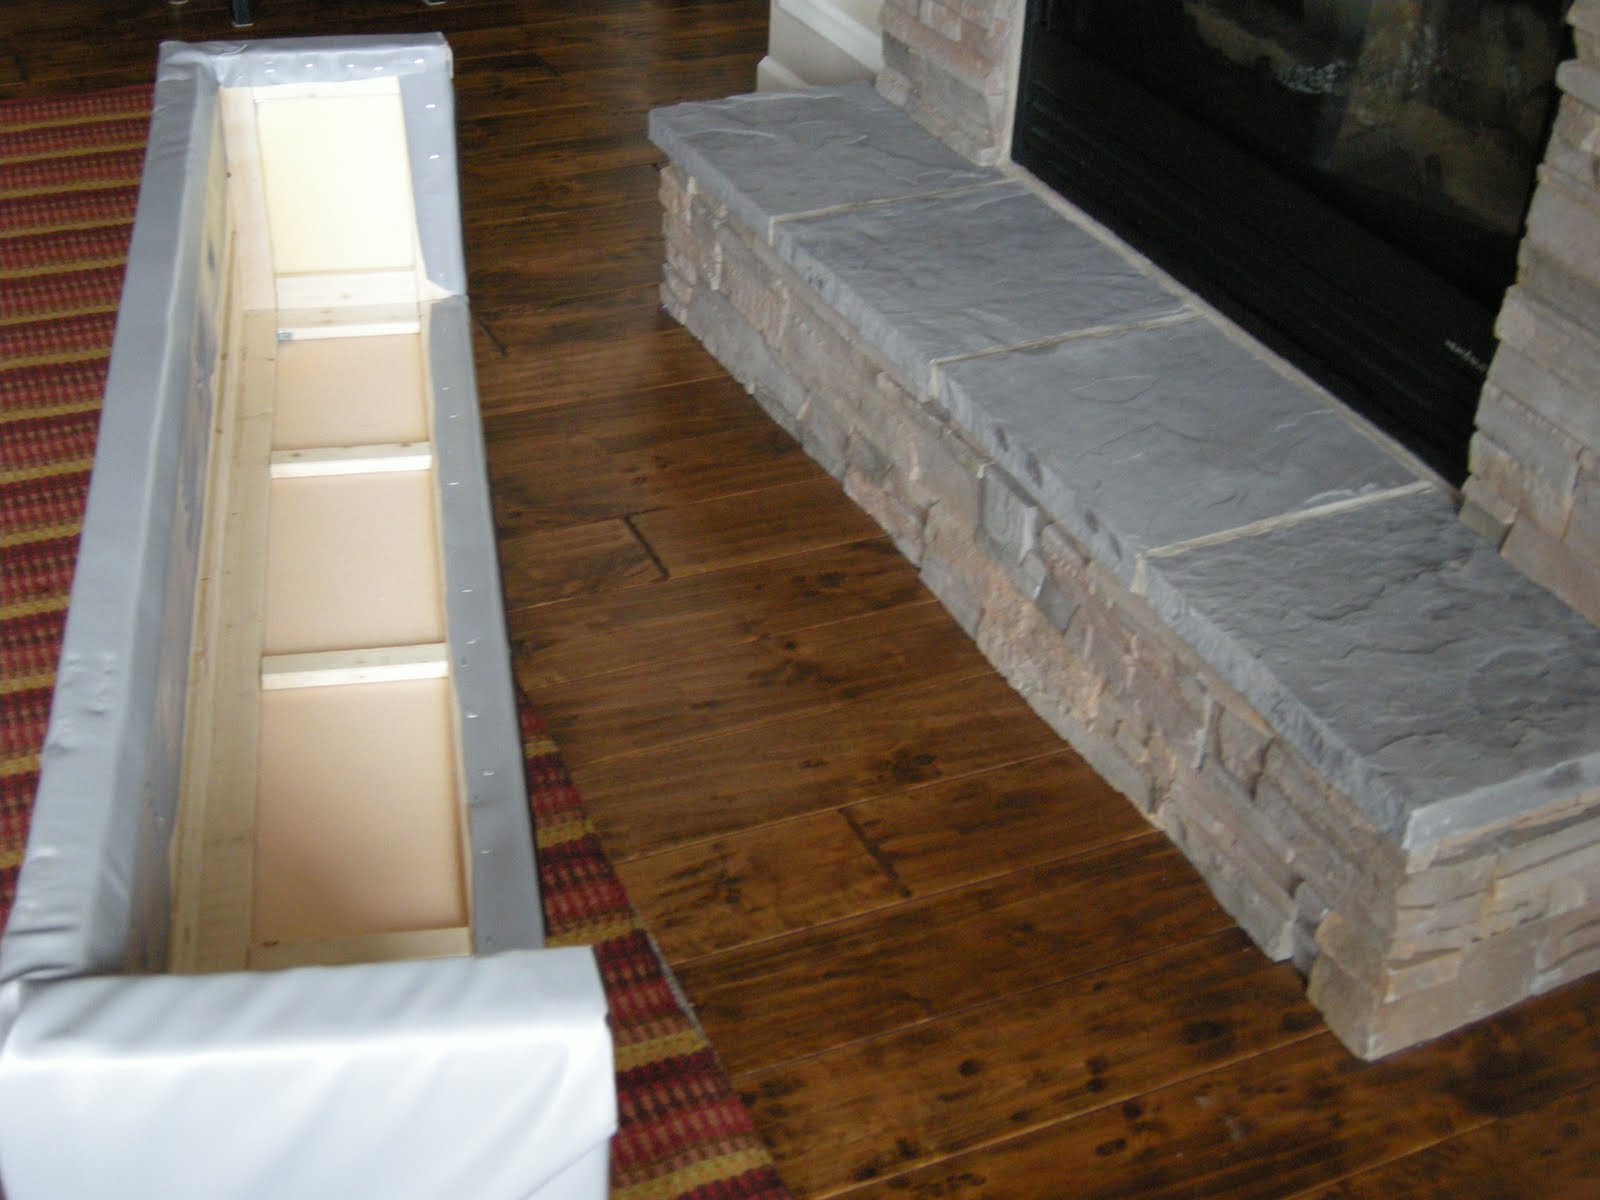 Fireplace Baby Proofing- Here is my quick solution to keep my newly  crawling baby out of the fireplace!…